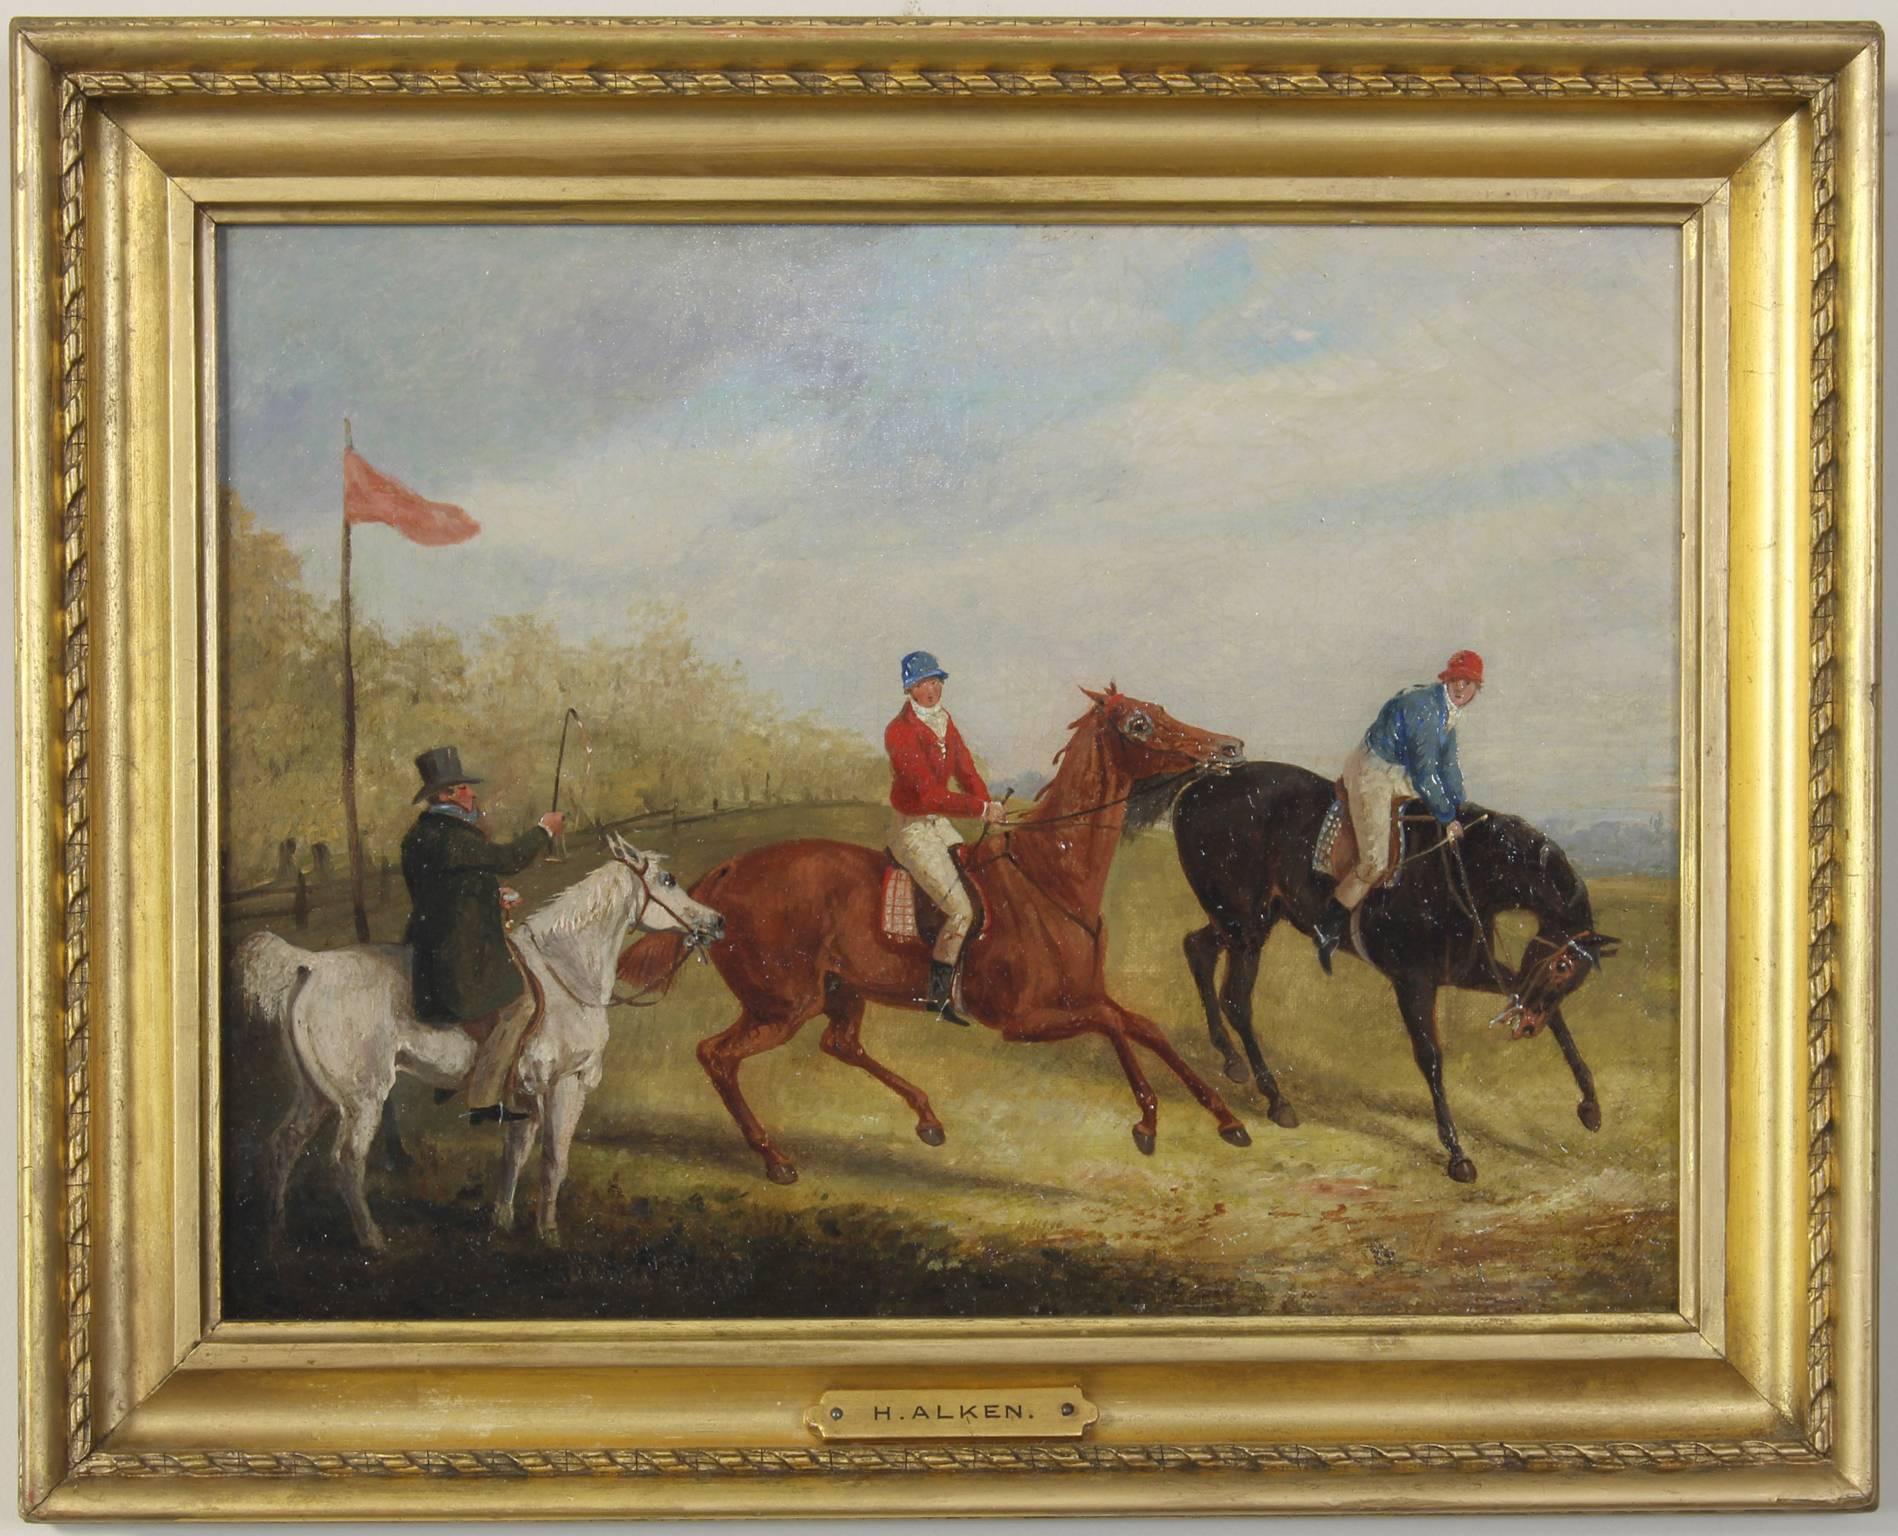 An exceptional pair of early 19th century English oil on canvas sporting paintings by Henry Thomas Alken (1785-1851) depicting a steeple chase with a provenance from Arthur Ackerman Gallery, New York.